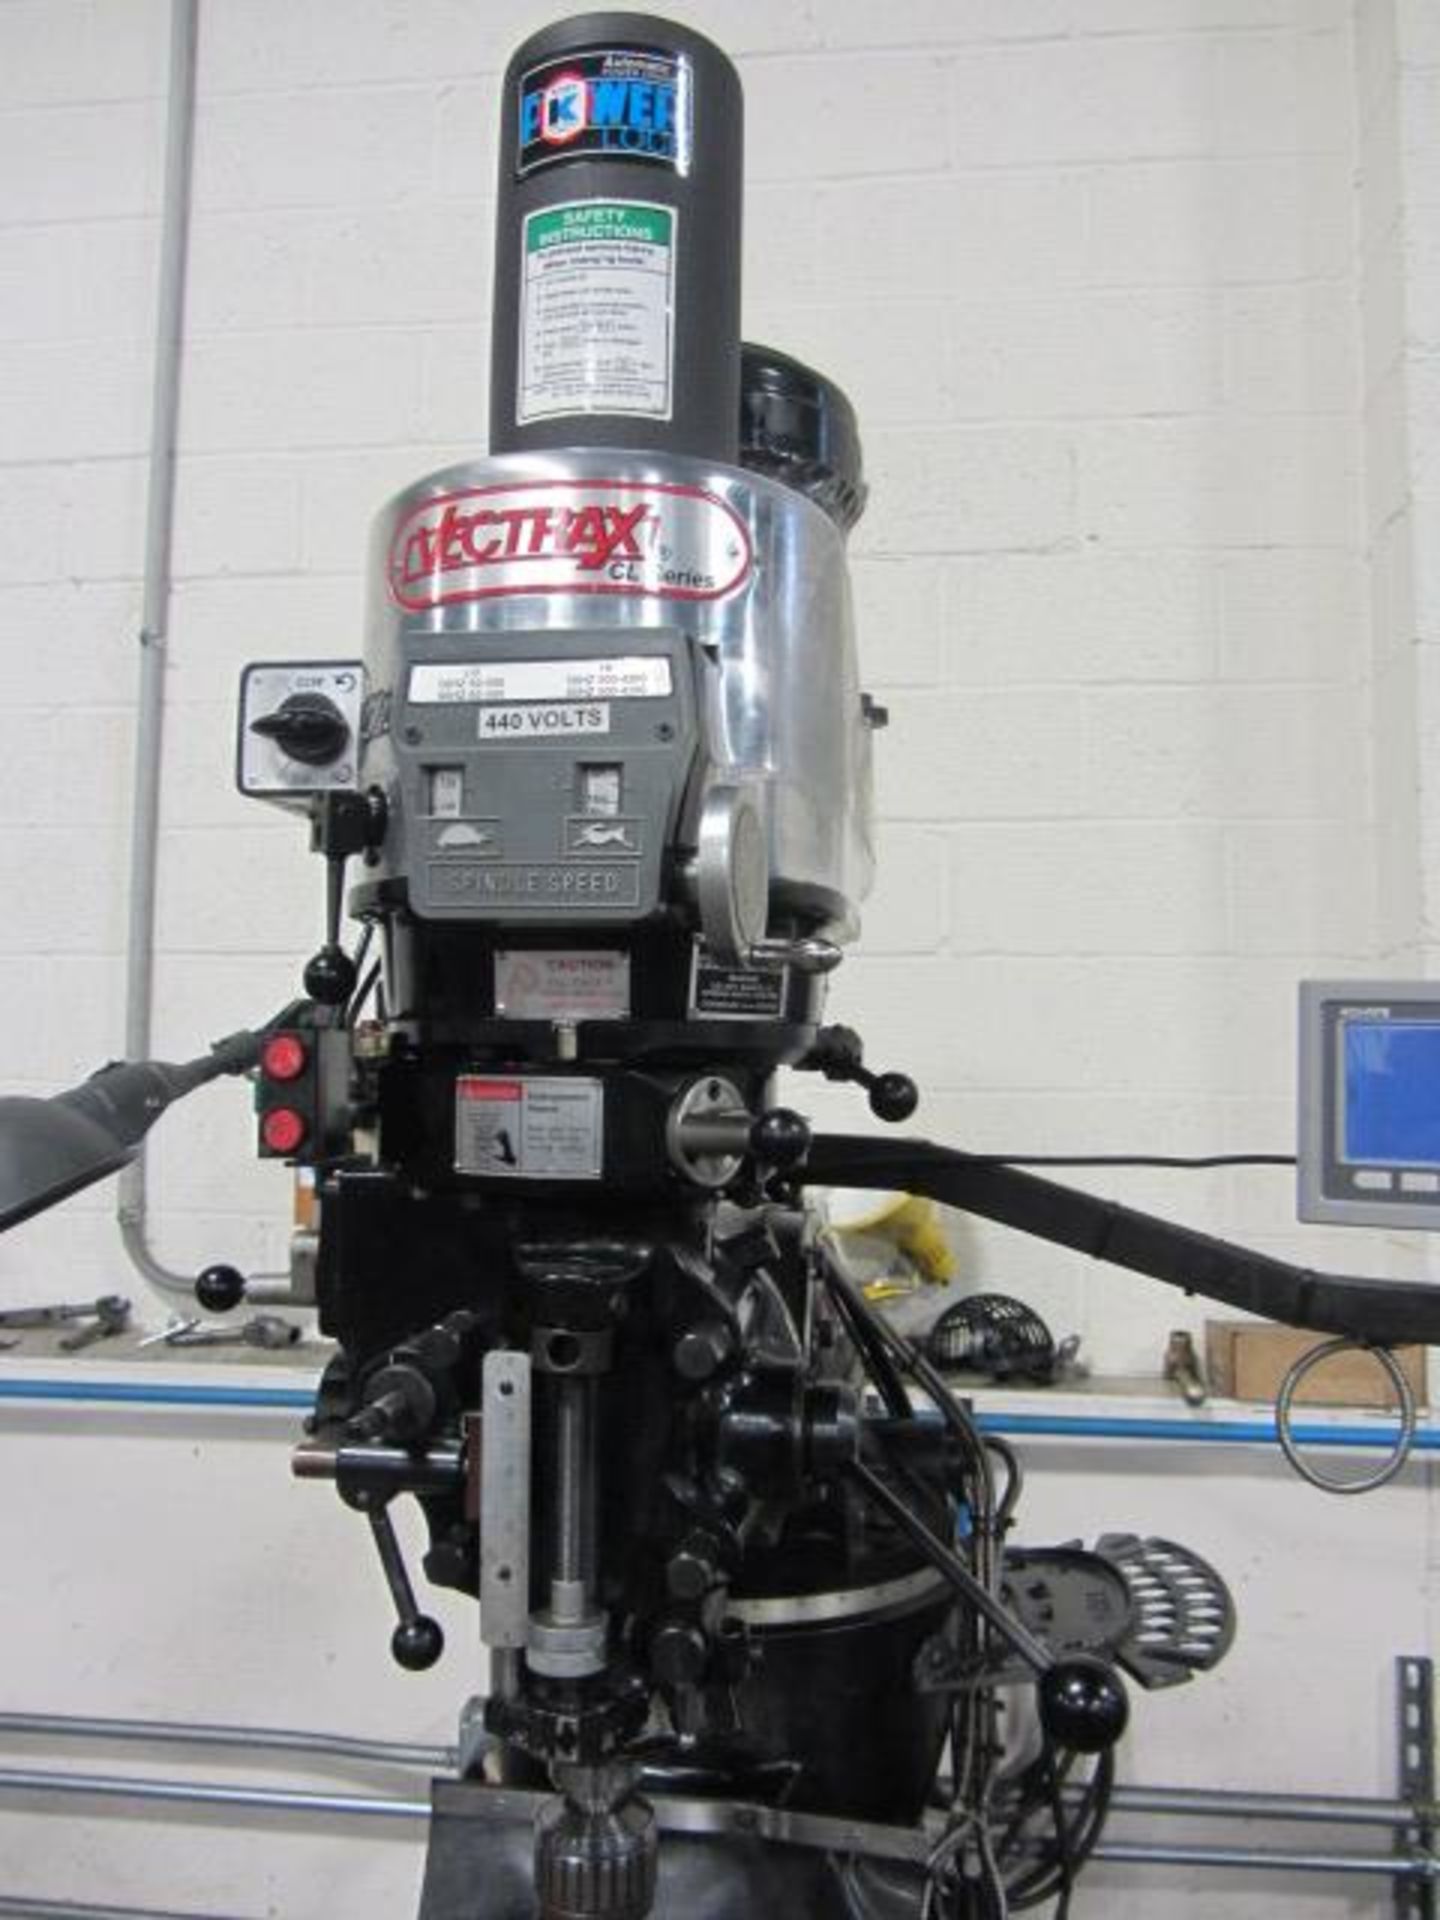 Vectrax Vari-Speed Vertical Milling Machine with 9'' x 48'' Power Feed Table, Longitudinal Power - Image 3 of 7